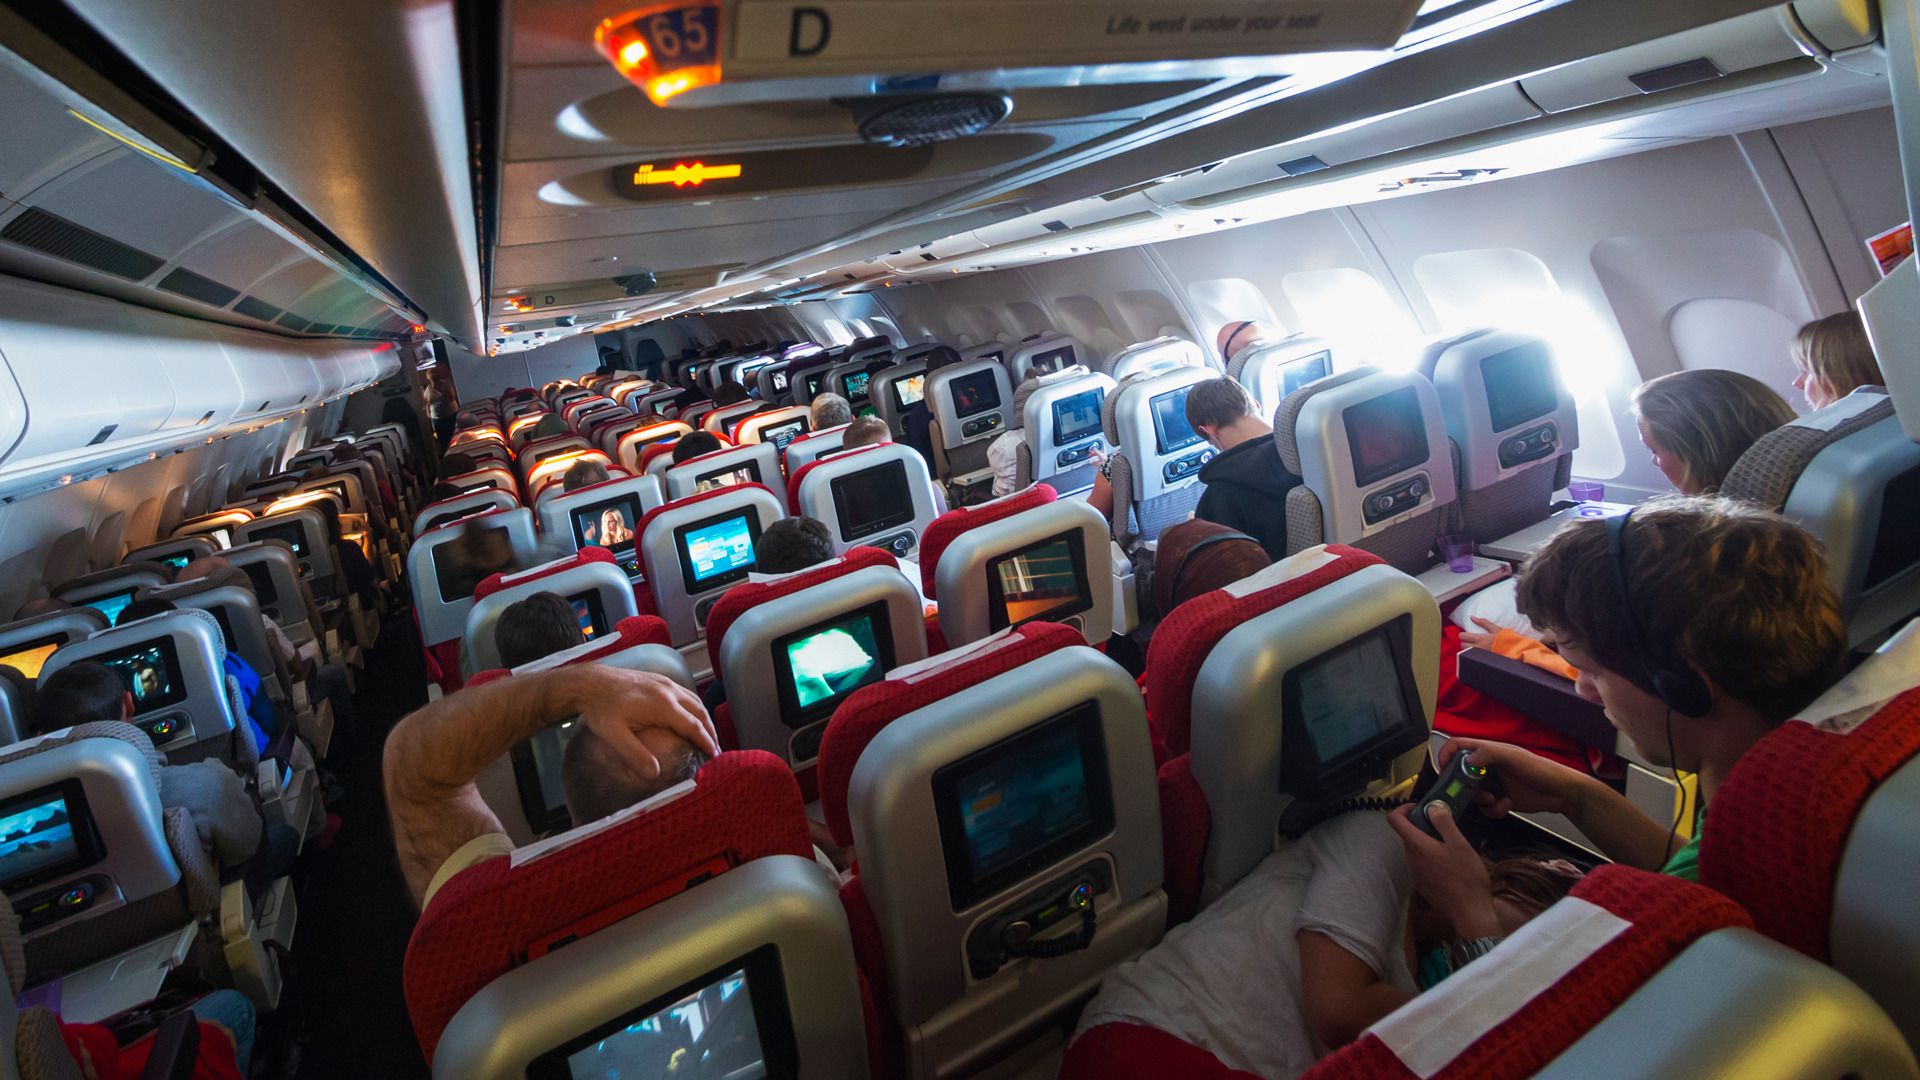 Someone penned the open letter we all dream of writing that obnoxious plane passenger